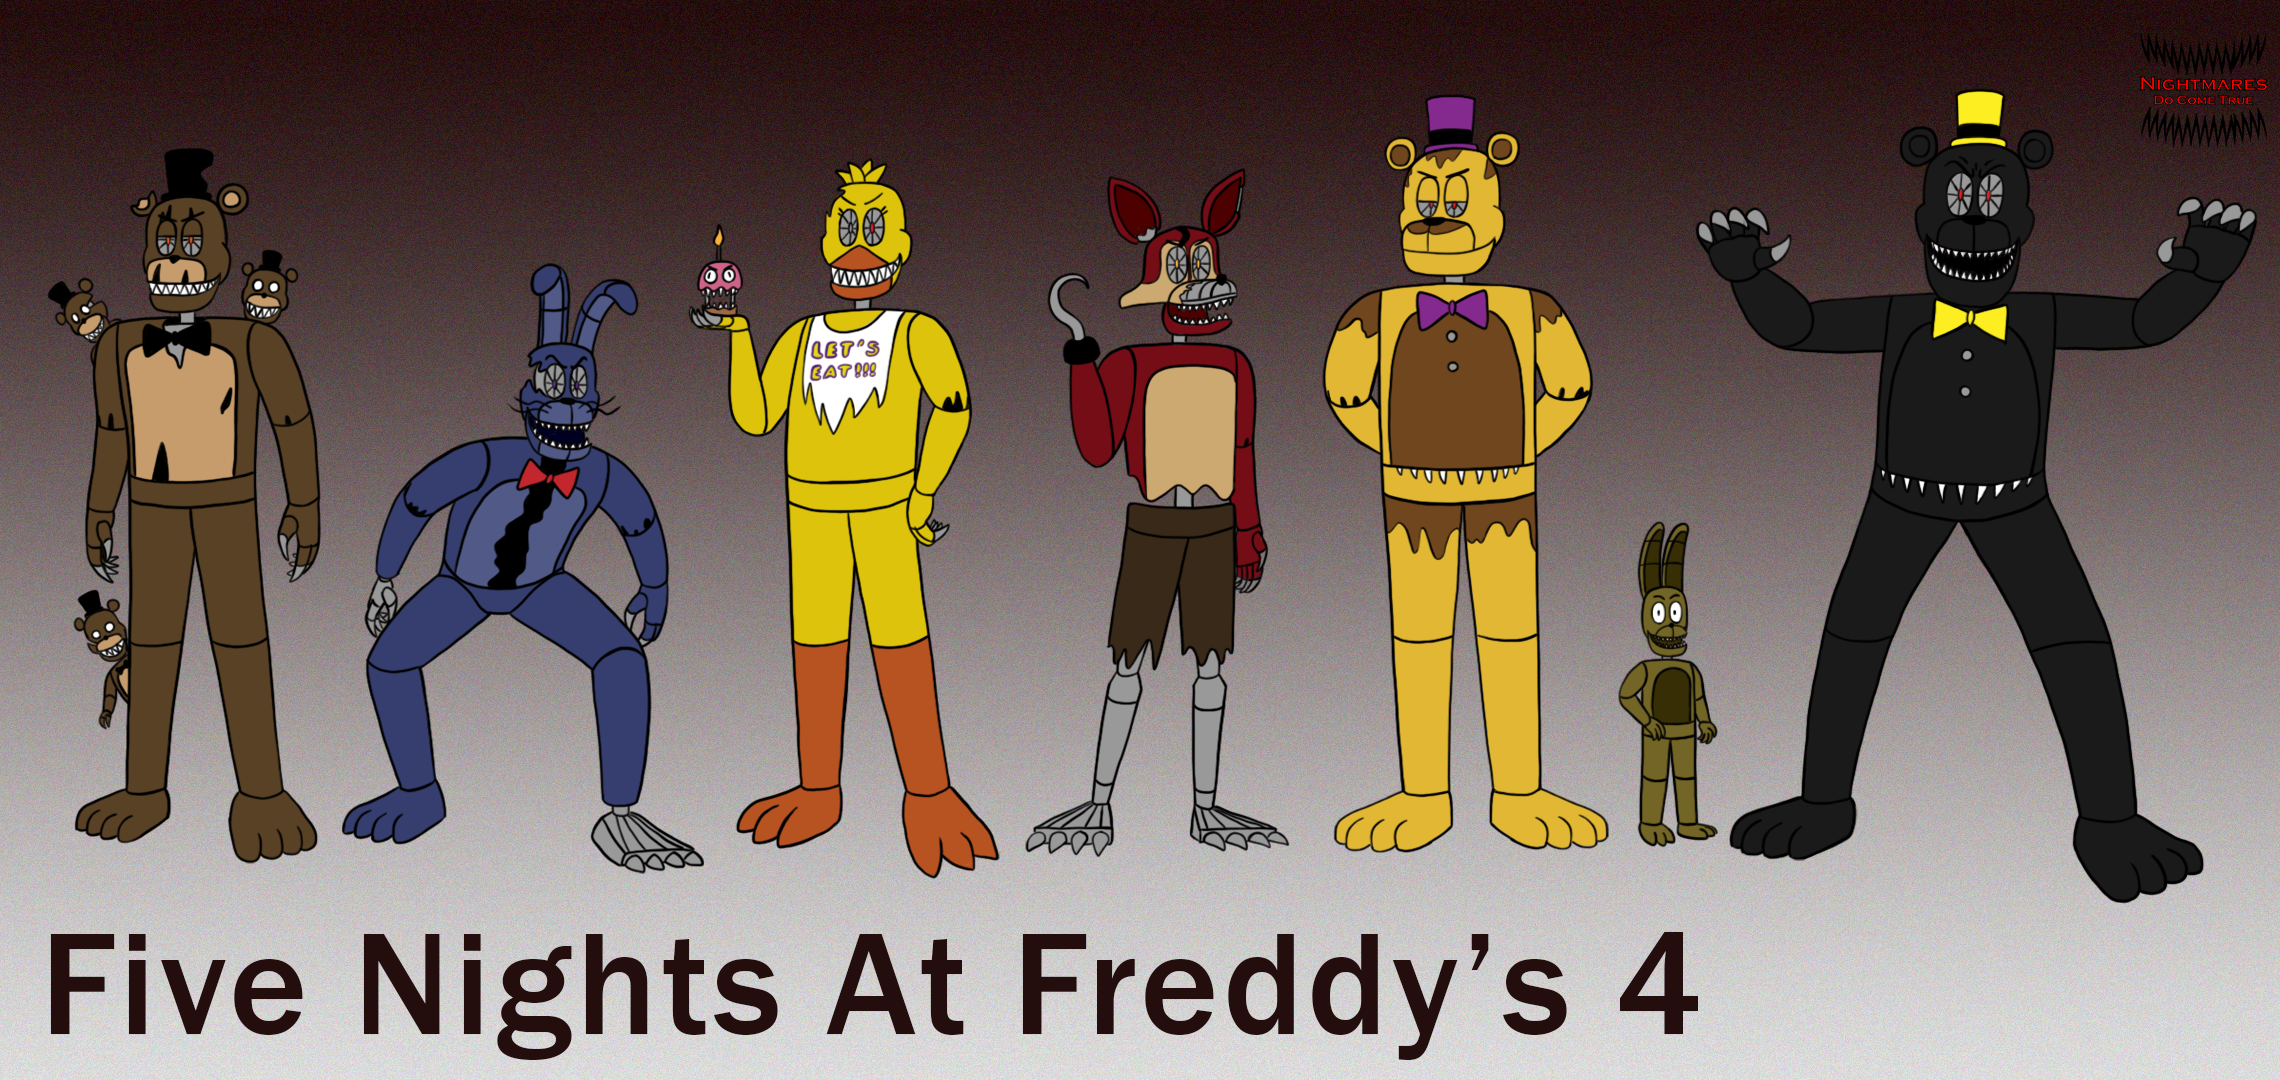 Five Nights at Freddy's 4: The Final Chapter coming this Halloween